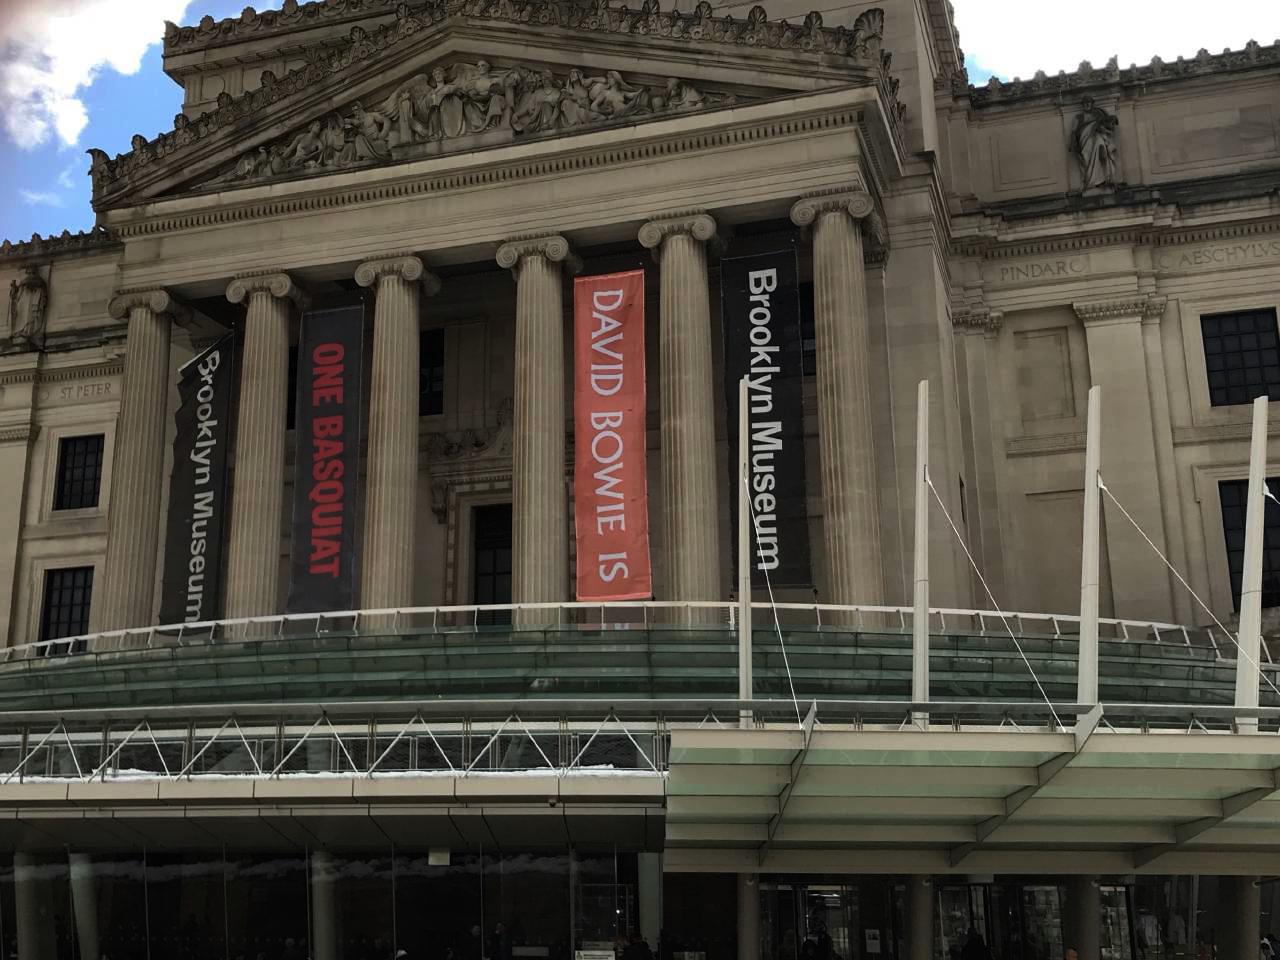 A picture showing the Brooklyn Museum in March 2018, when the David Bowie Is exhibition was showing there.